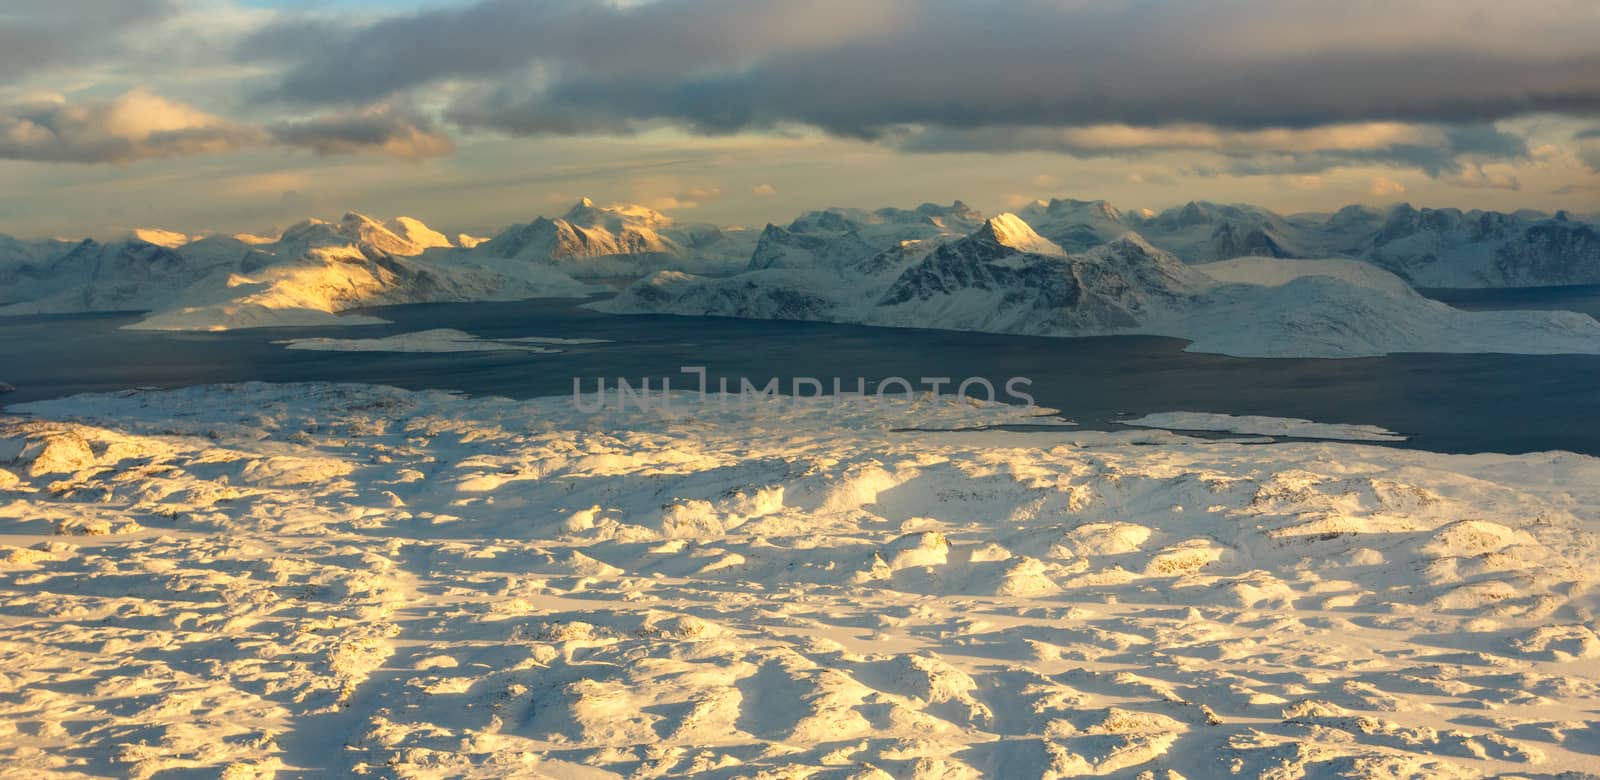 Greenlandic ice cap with wrozen mountains and fjord aerial view, by ambeon